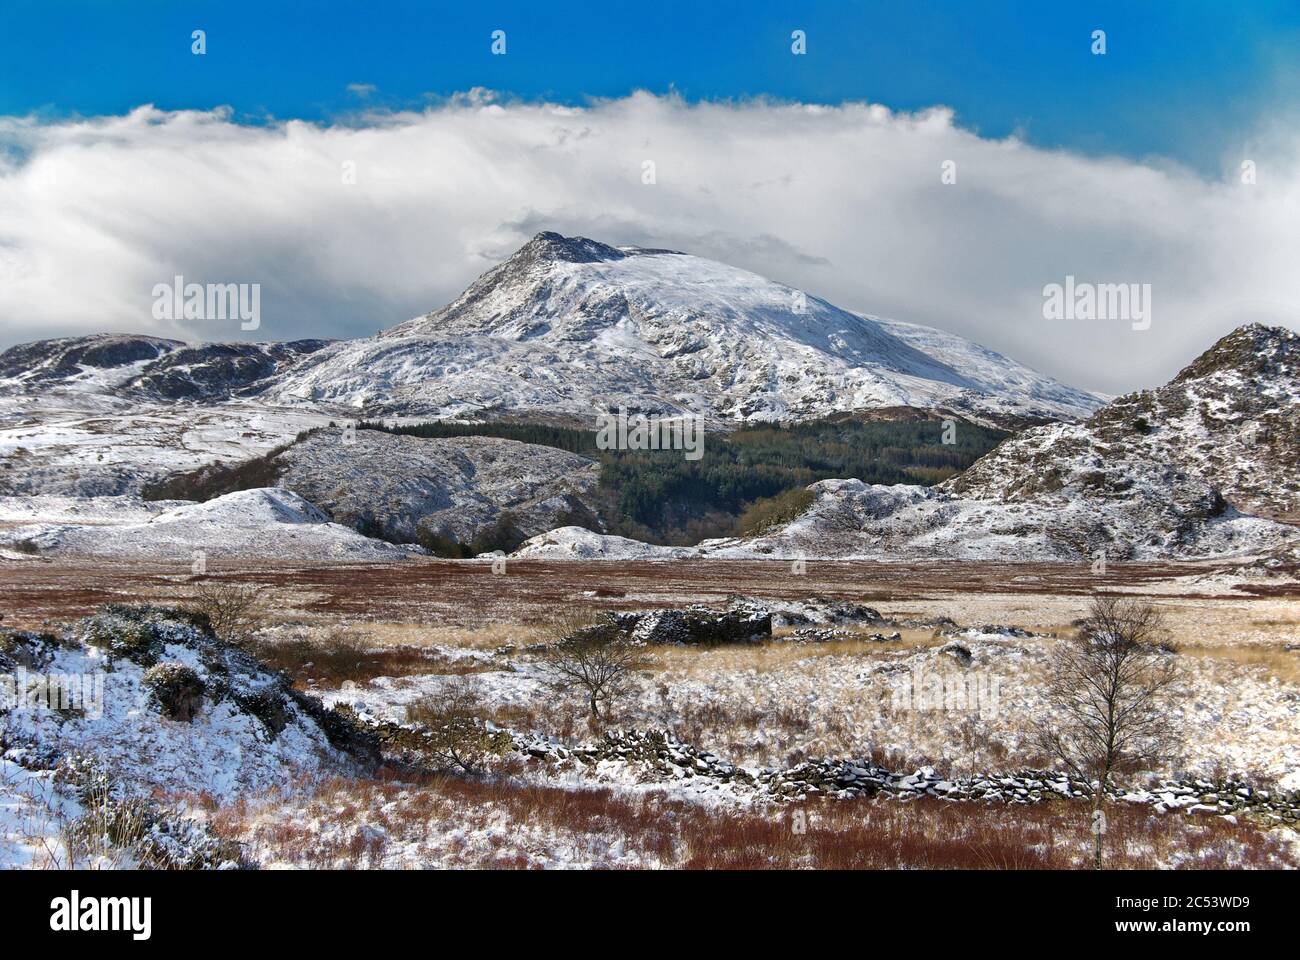 Moel Siabod is a mountain in the Snowdonia National Park in North Wales. It reaches a height of about 800 m. Stock Photo